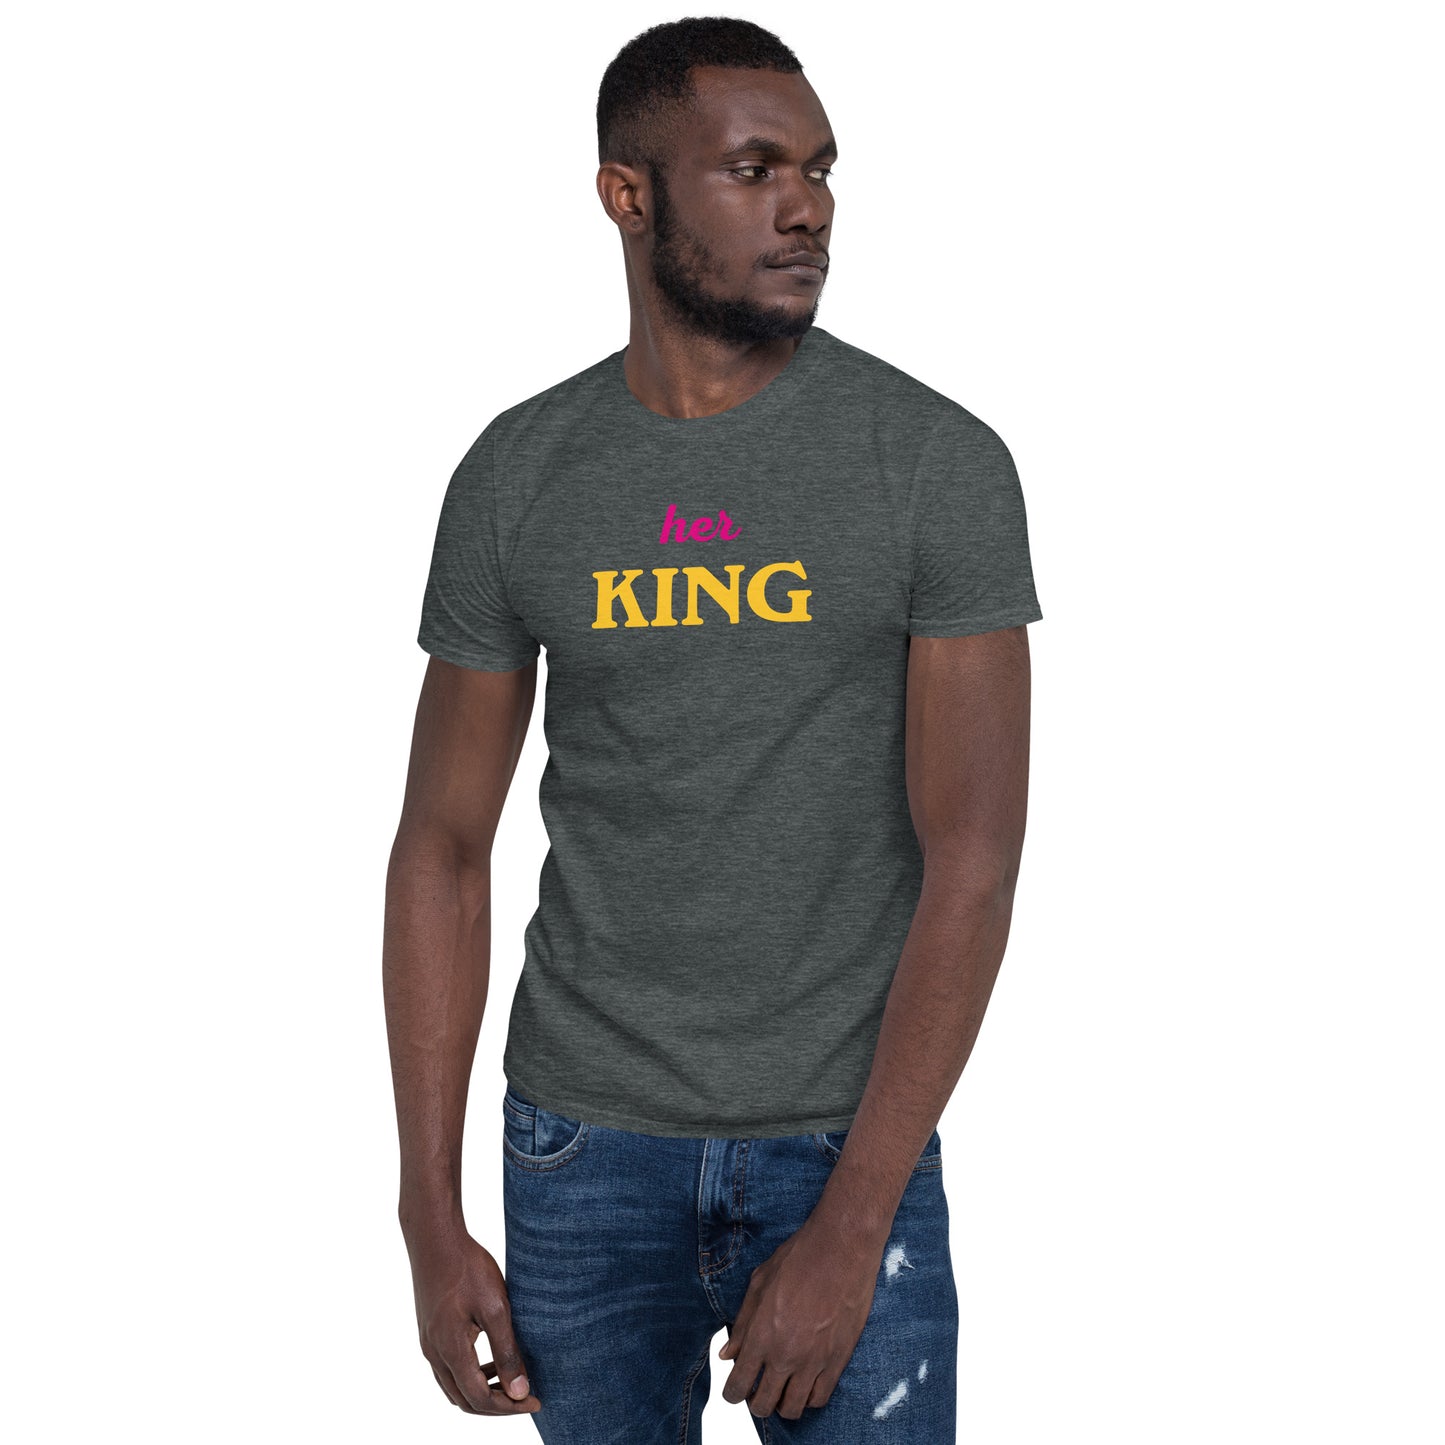 Her King Softstyle T-Shirt heather